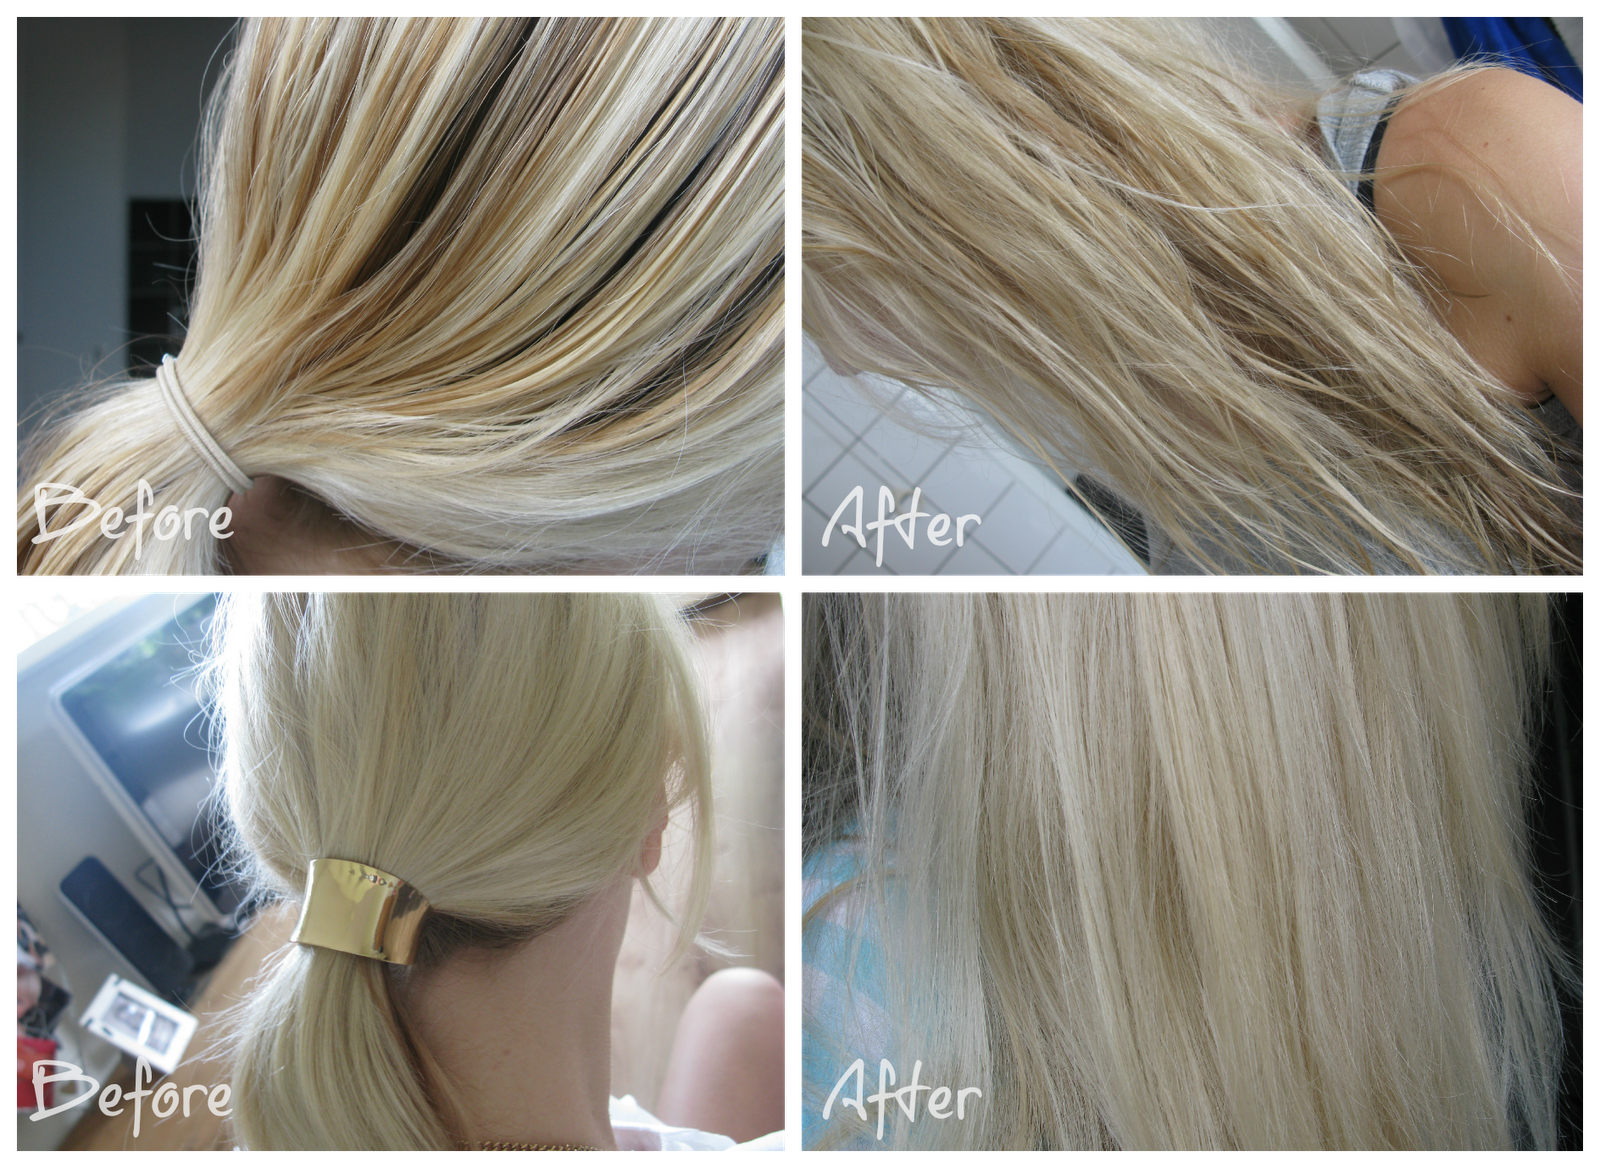 5. How to Maintain Blonde Hair Color - wide 1